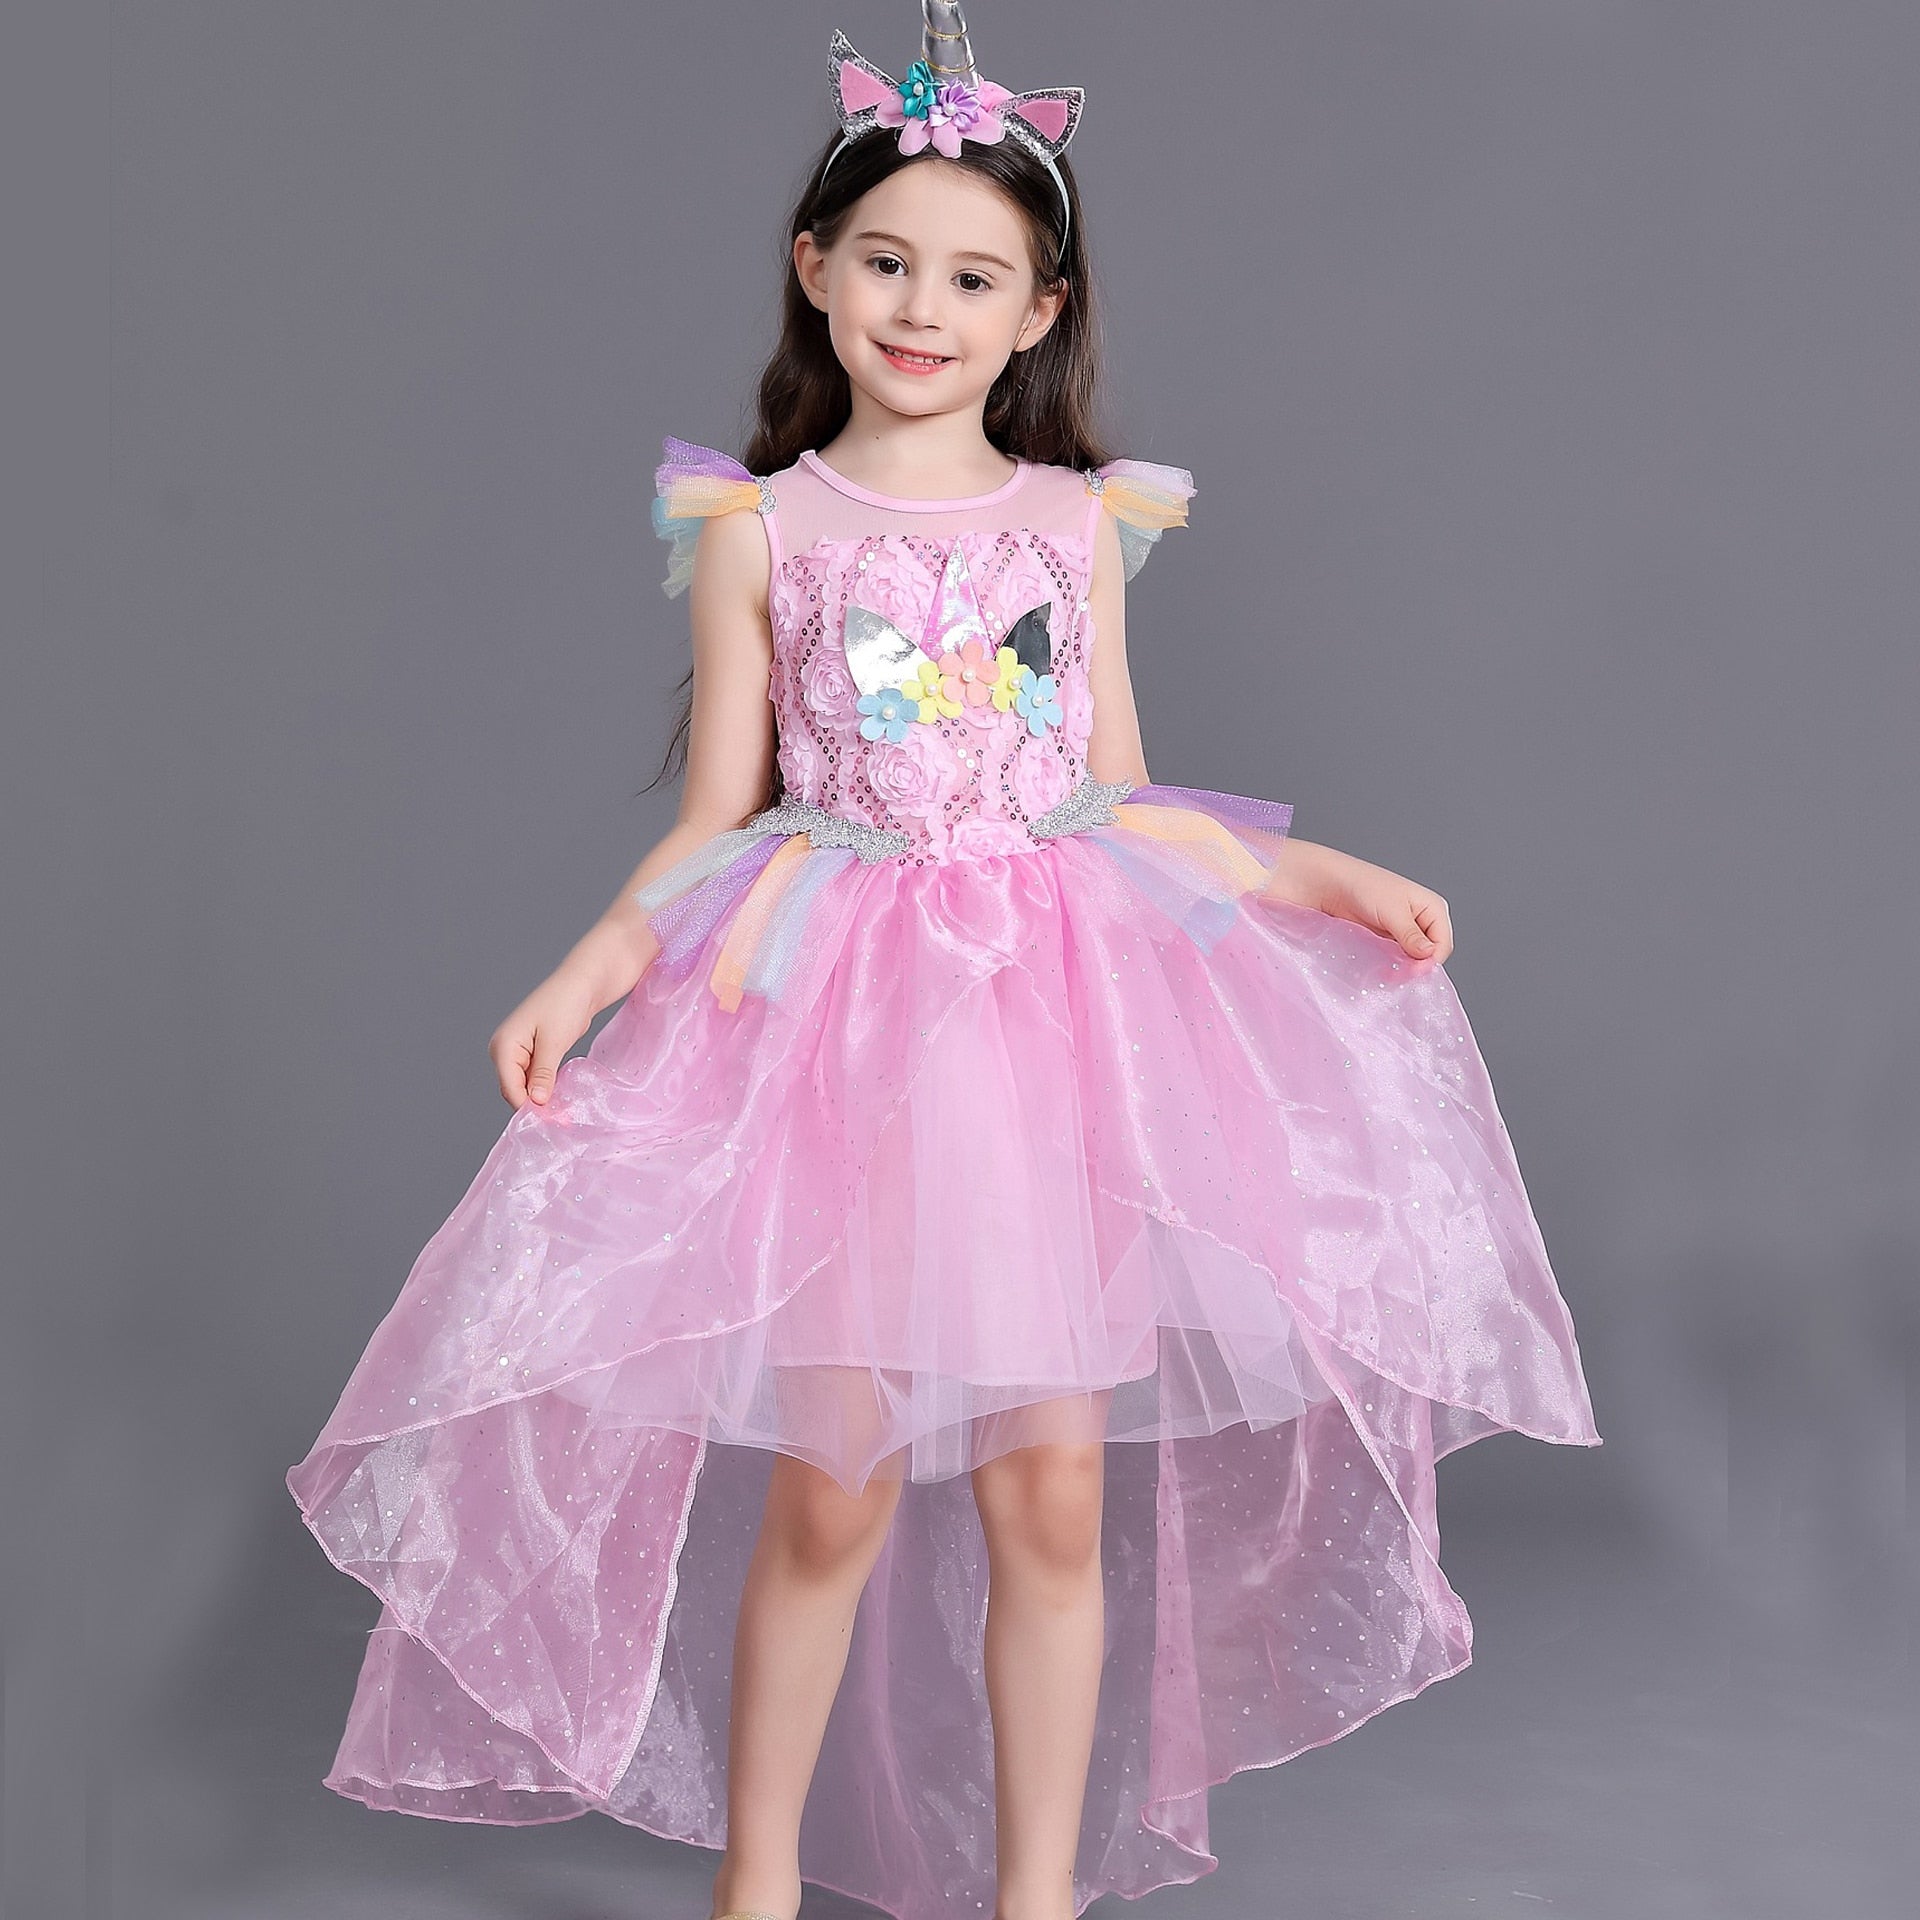 Girls Fairy Tale Princess Couture Gown | Kids Special Occasion Gown